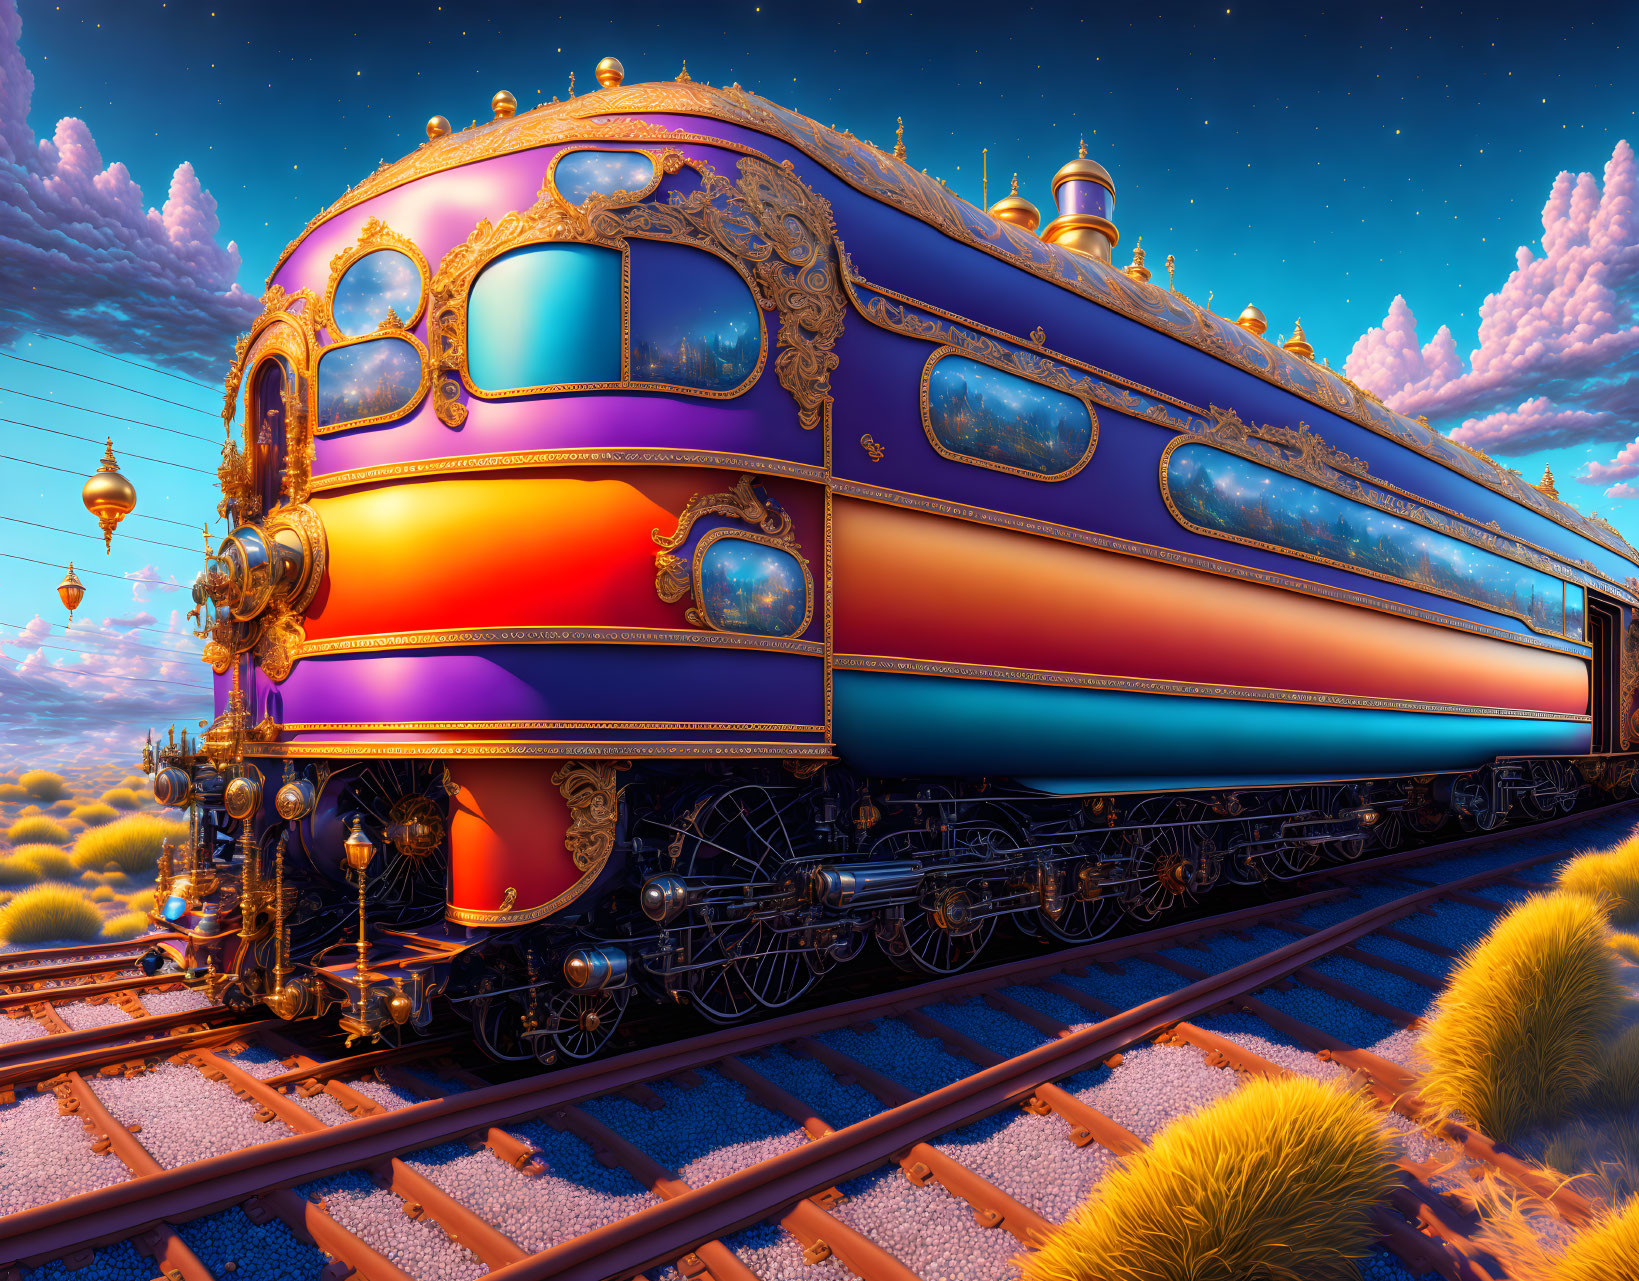 Colorful Fantasy Train with Golden Details on Track at Dusk